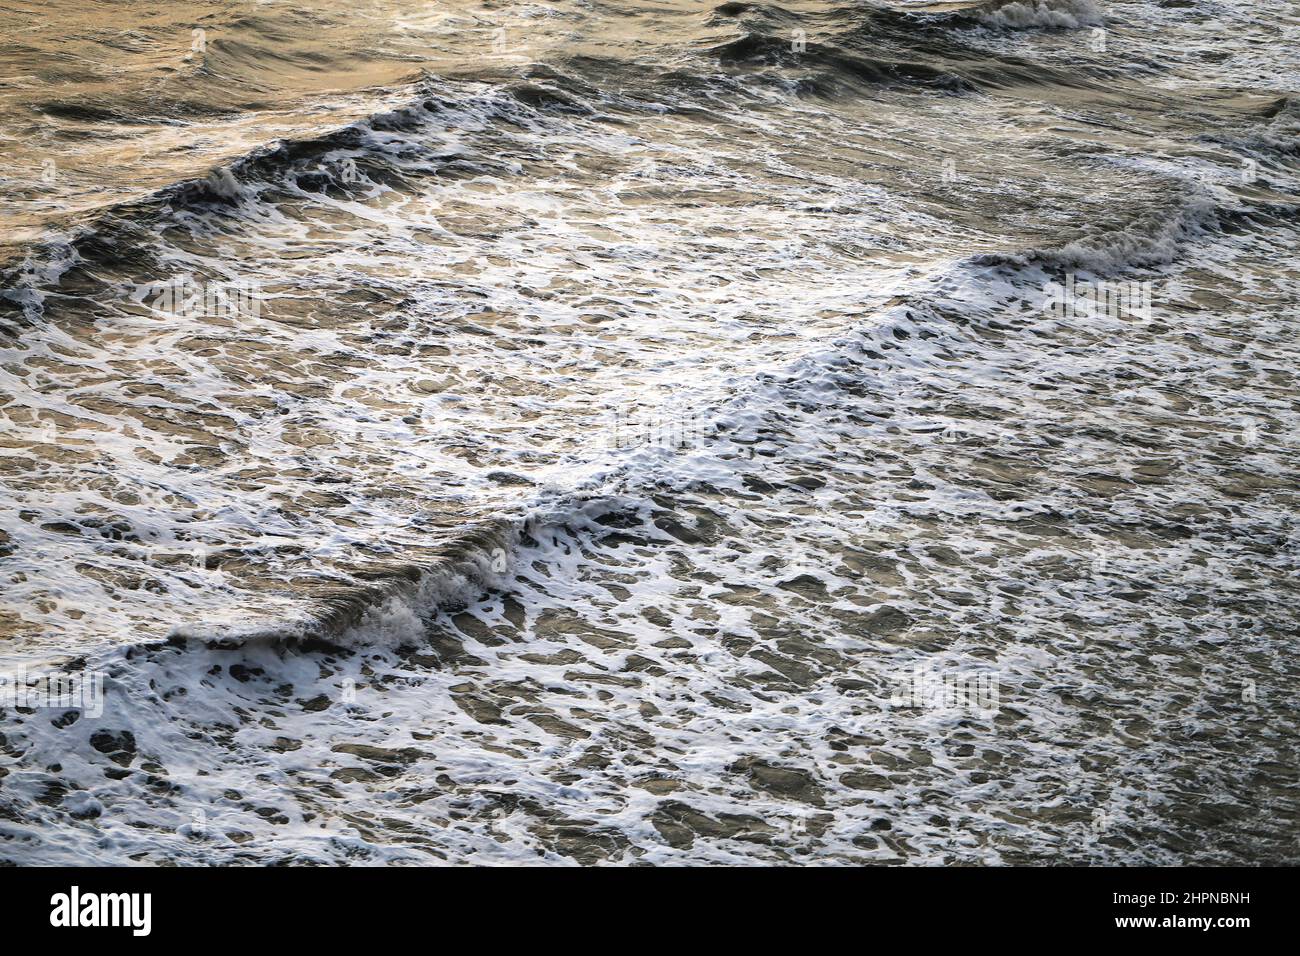 Beautiful blue sea waves with white foam on the Black Sea photographed close-up Stock Photo